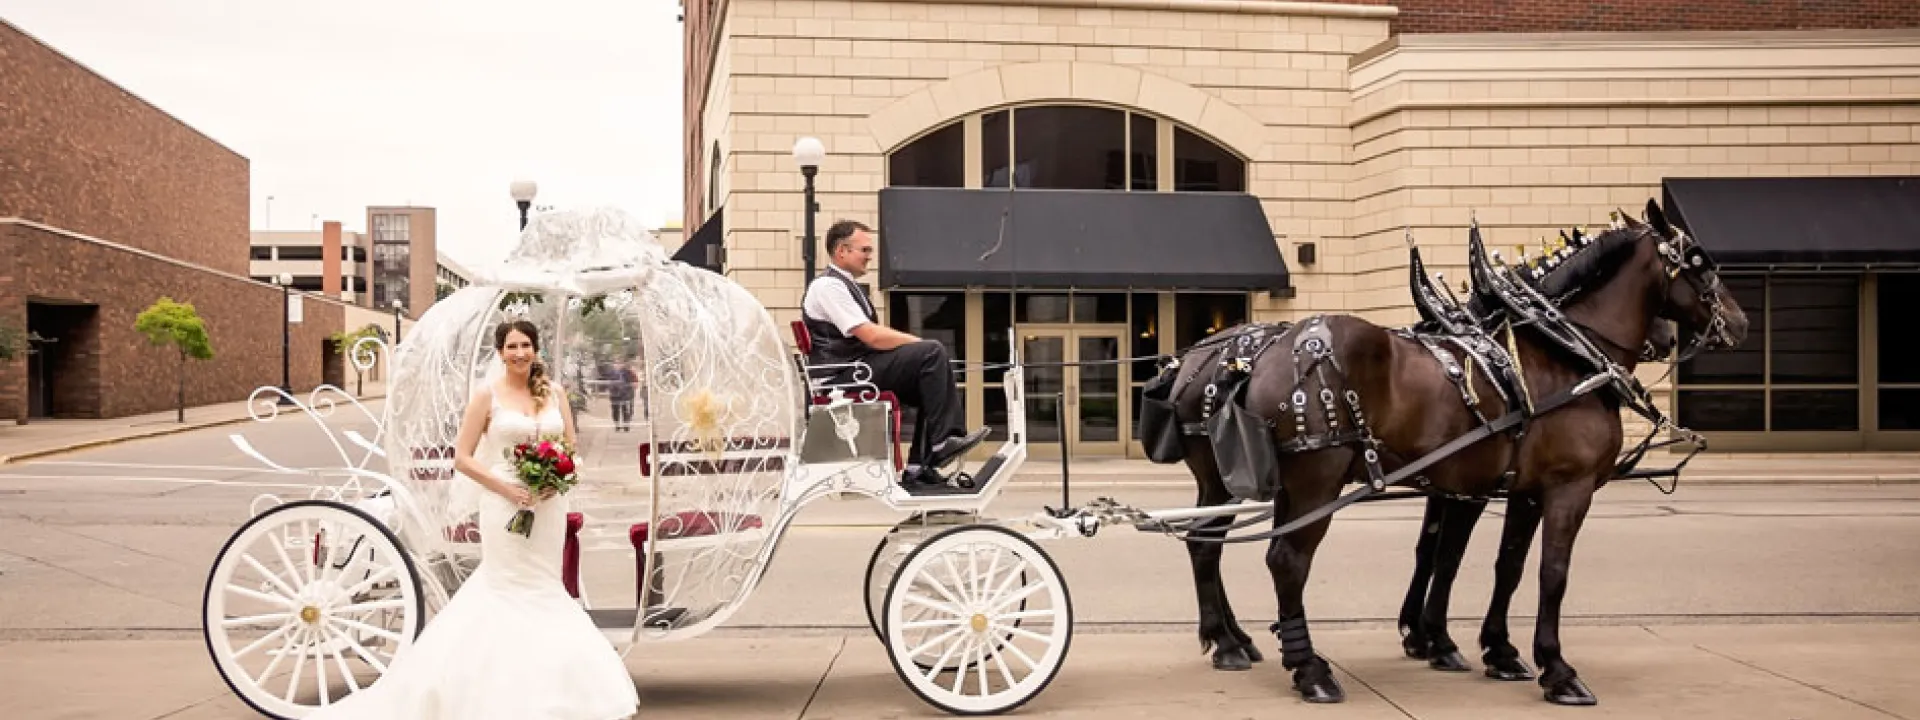 Couple celebrates their day, complete with horse and carriage, tiara and custom wine